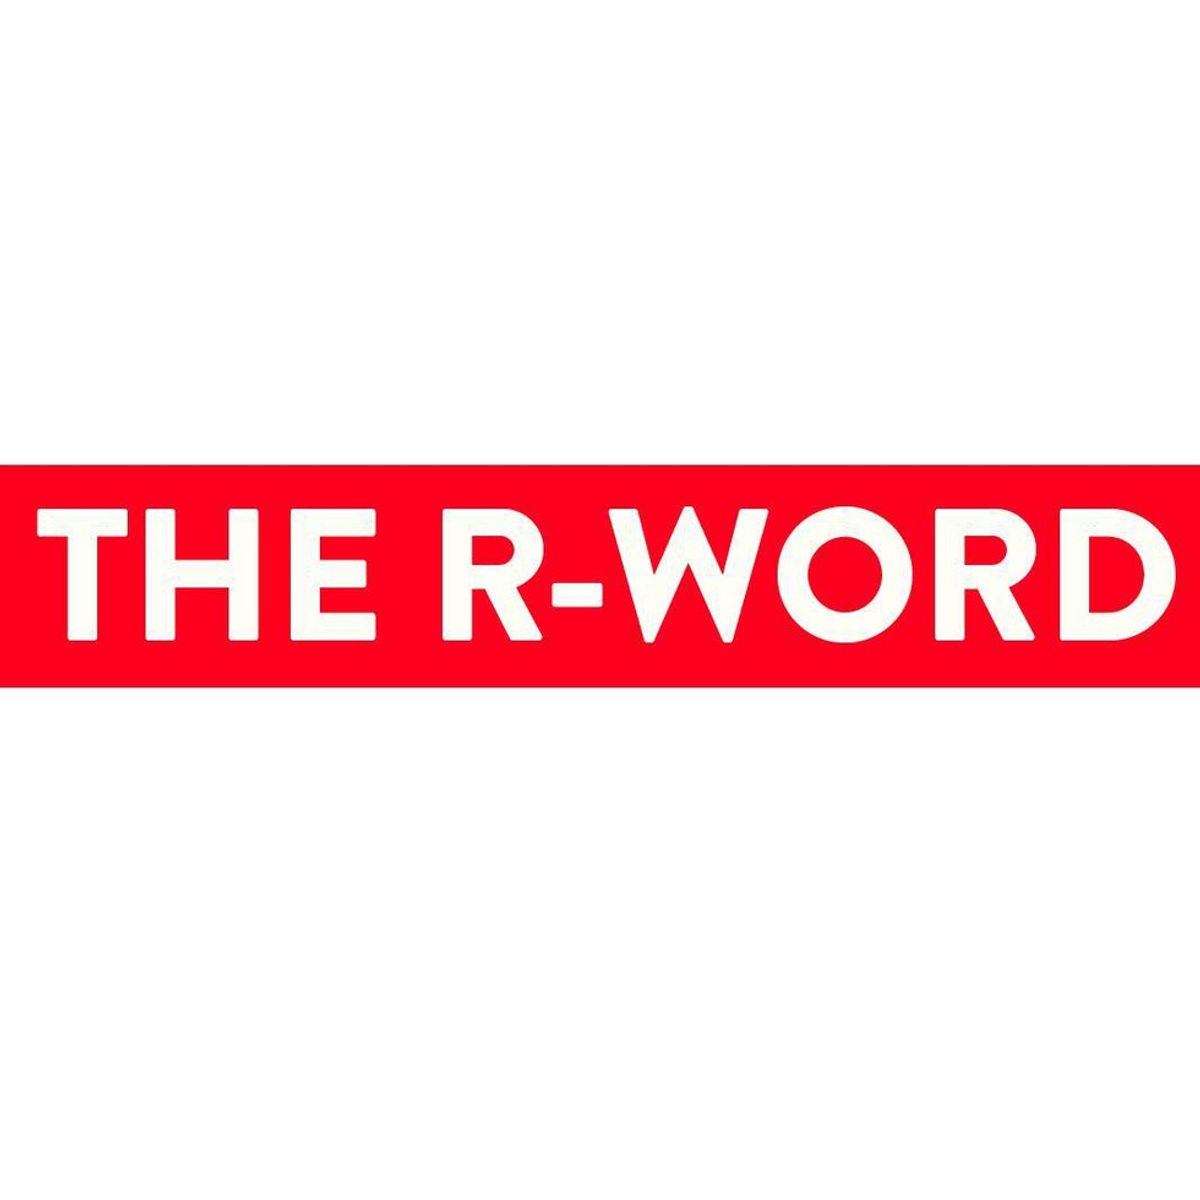 Let's Talk About The "R" Word!